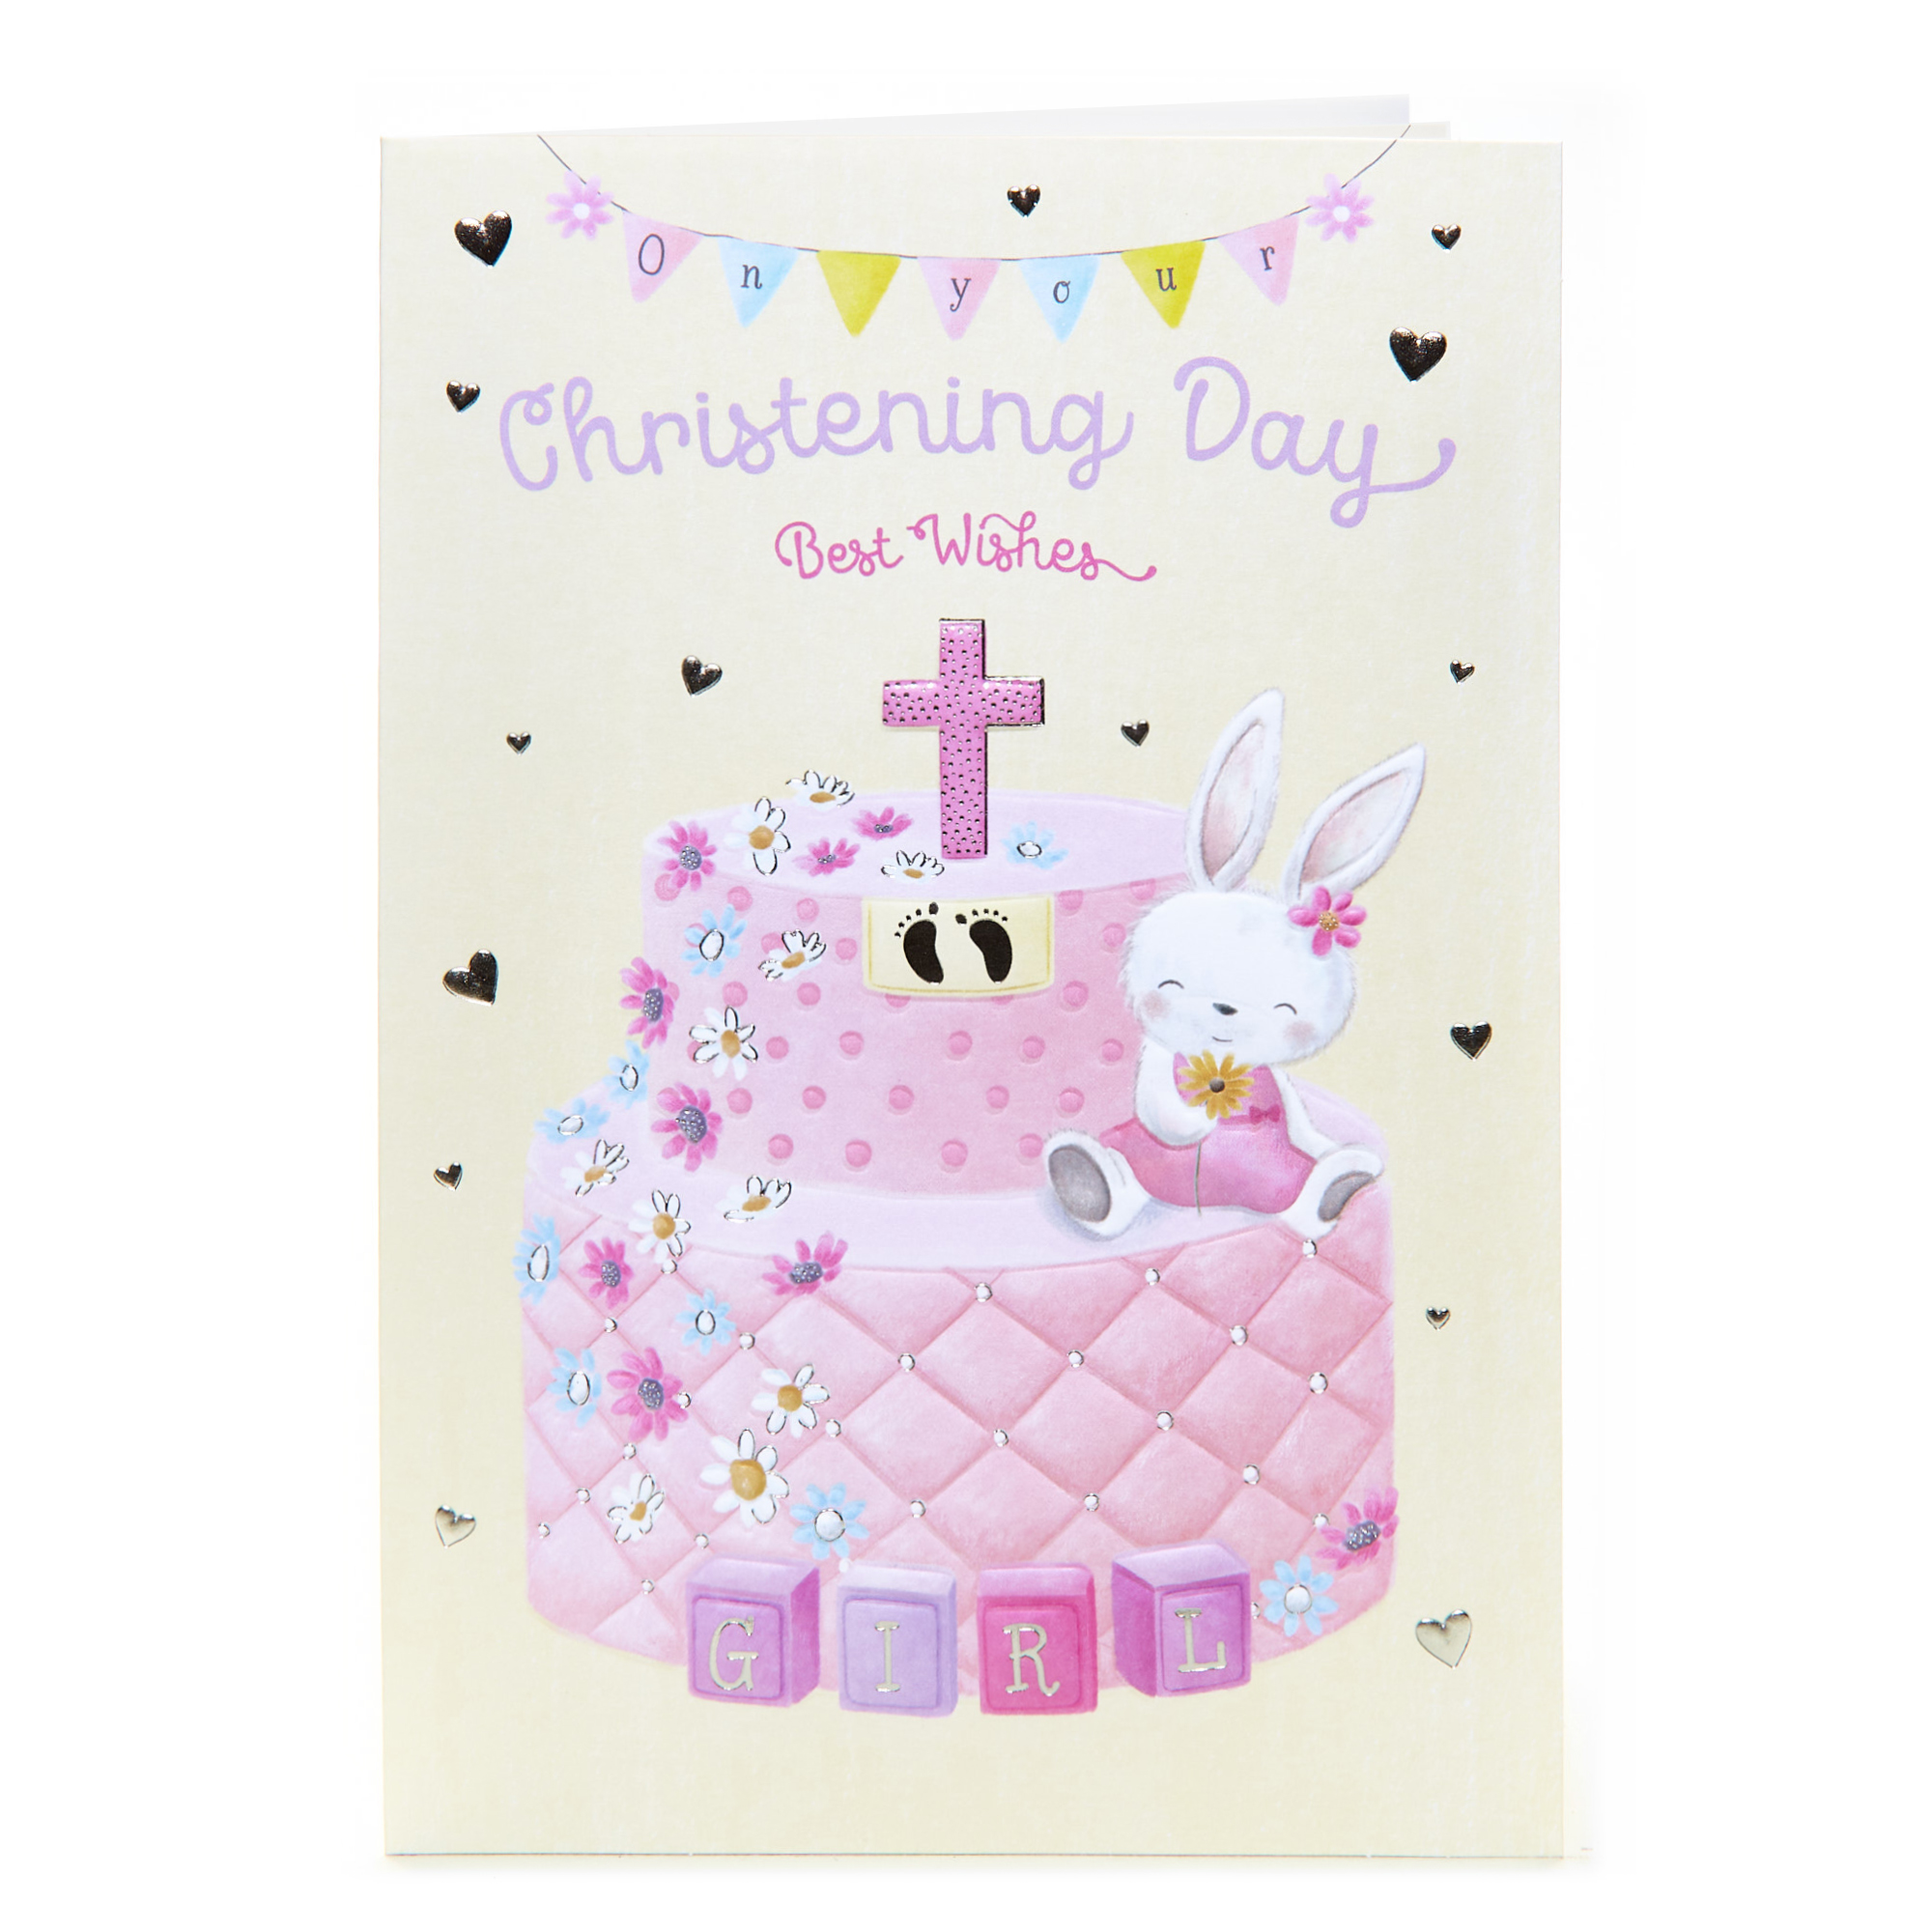 Christening Card - Best Wishes, Girl